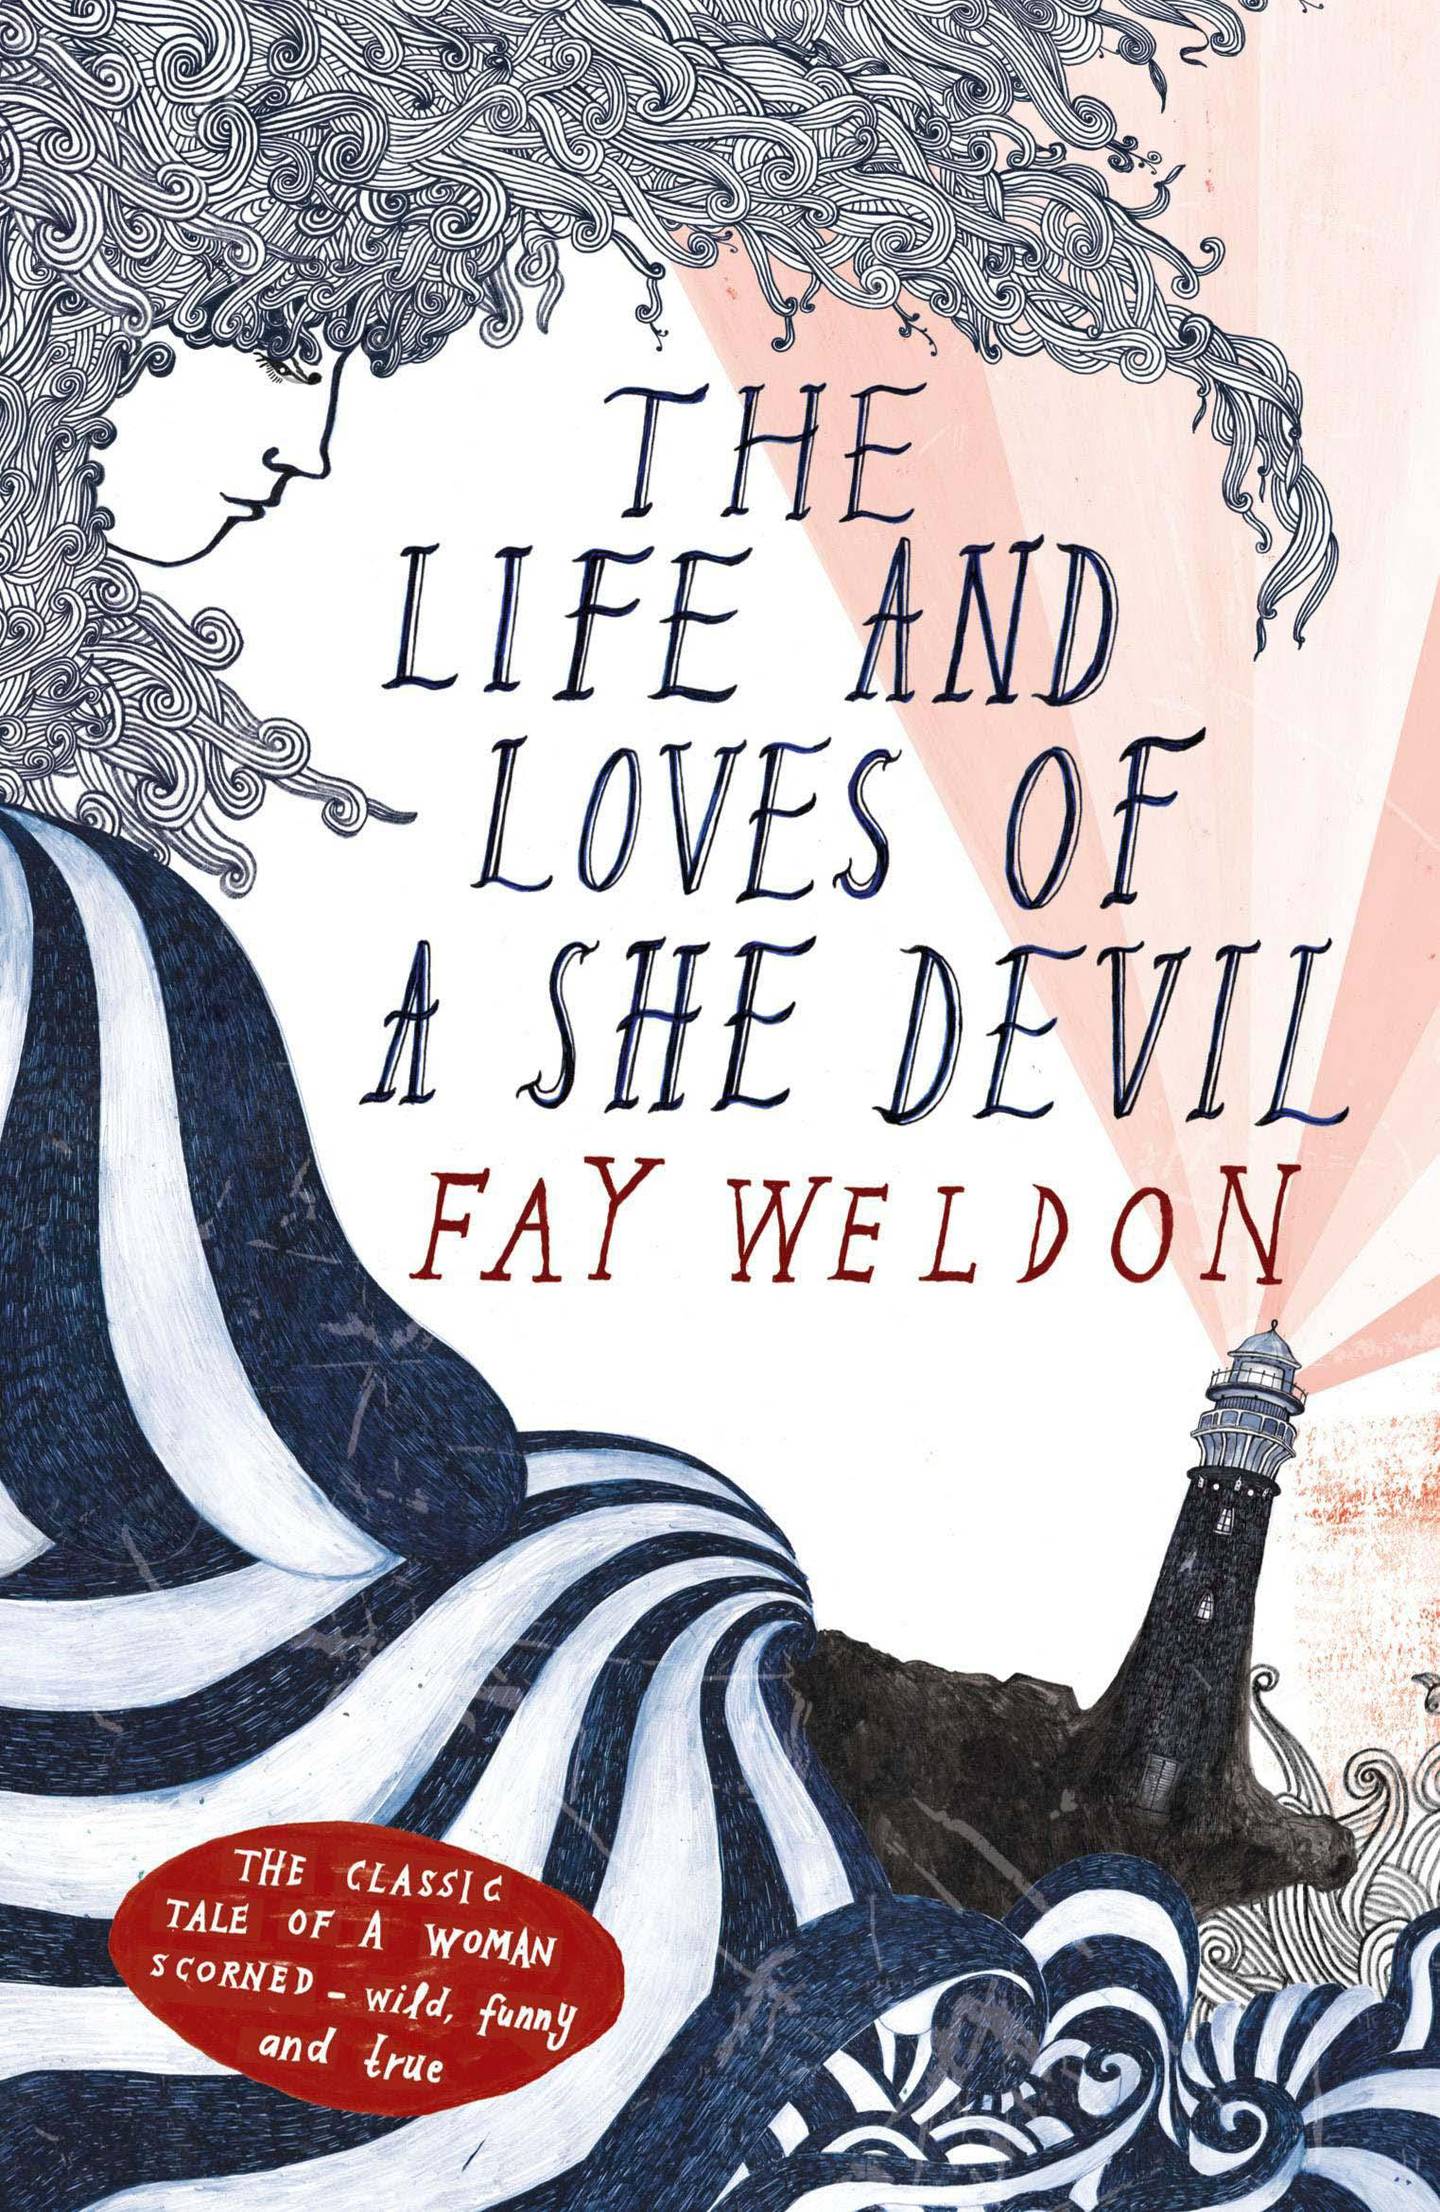 The Lives and Loves of a She-Devil by Fay Weldon. Courtesy Sceptre